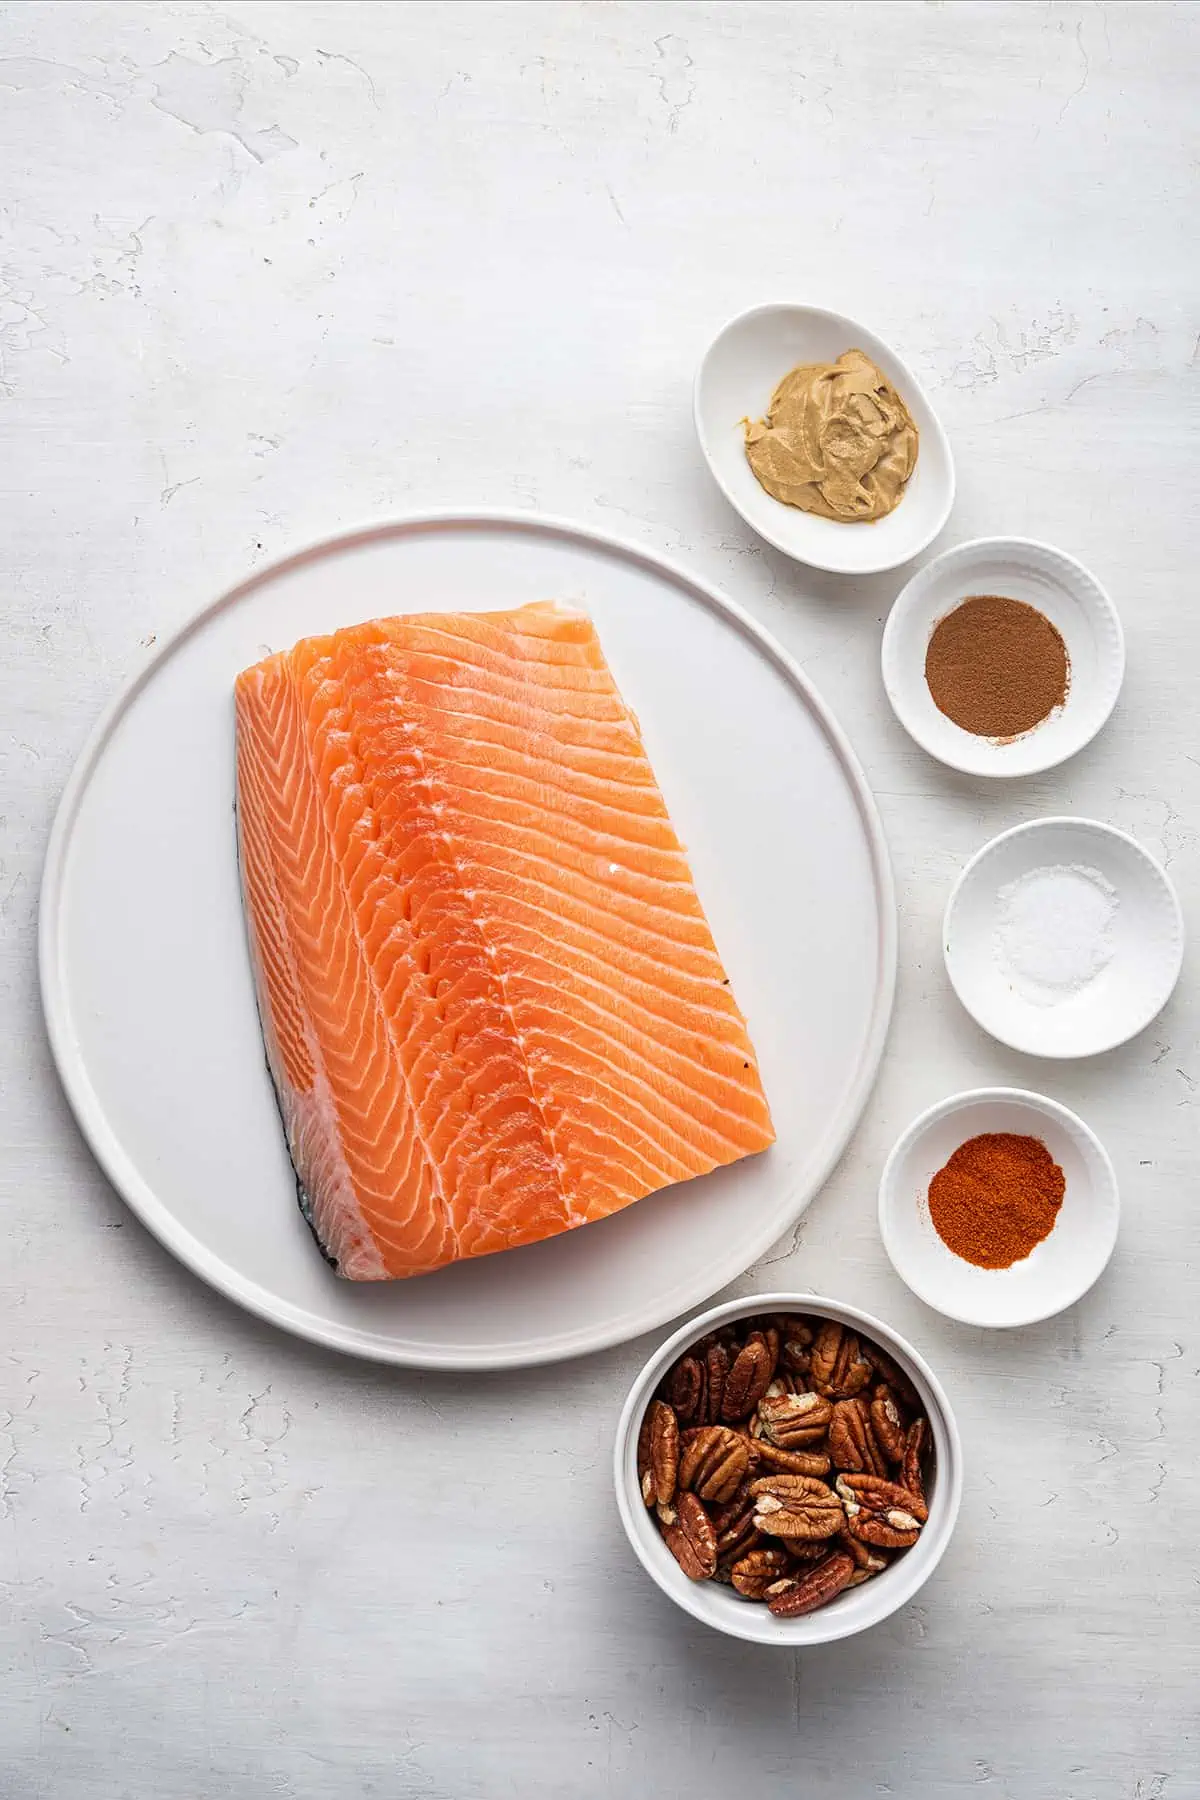 Ingredients for pecan crusted salmon in white bowls